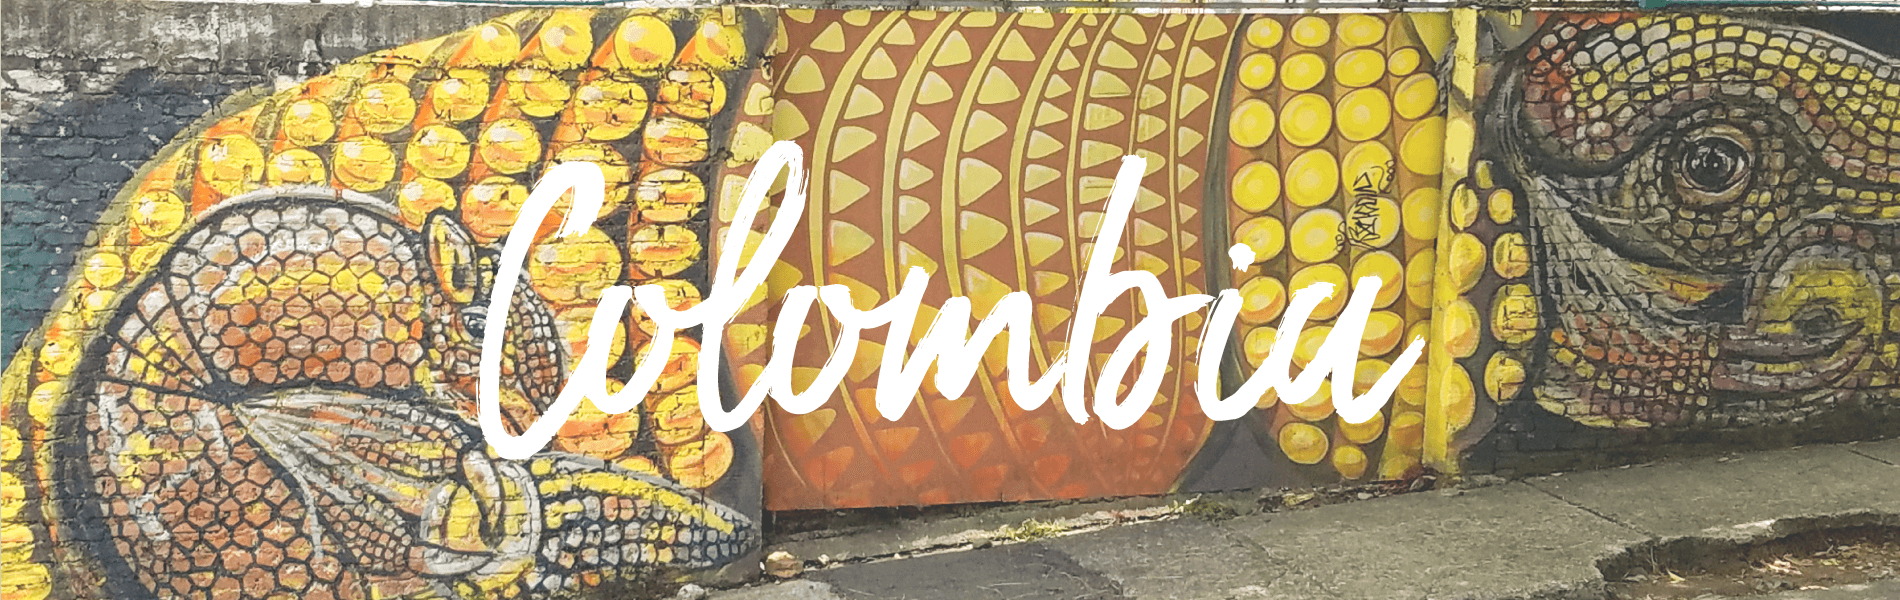 Colombia Header Image